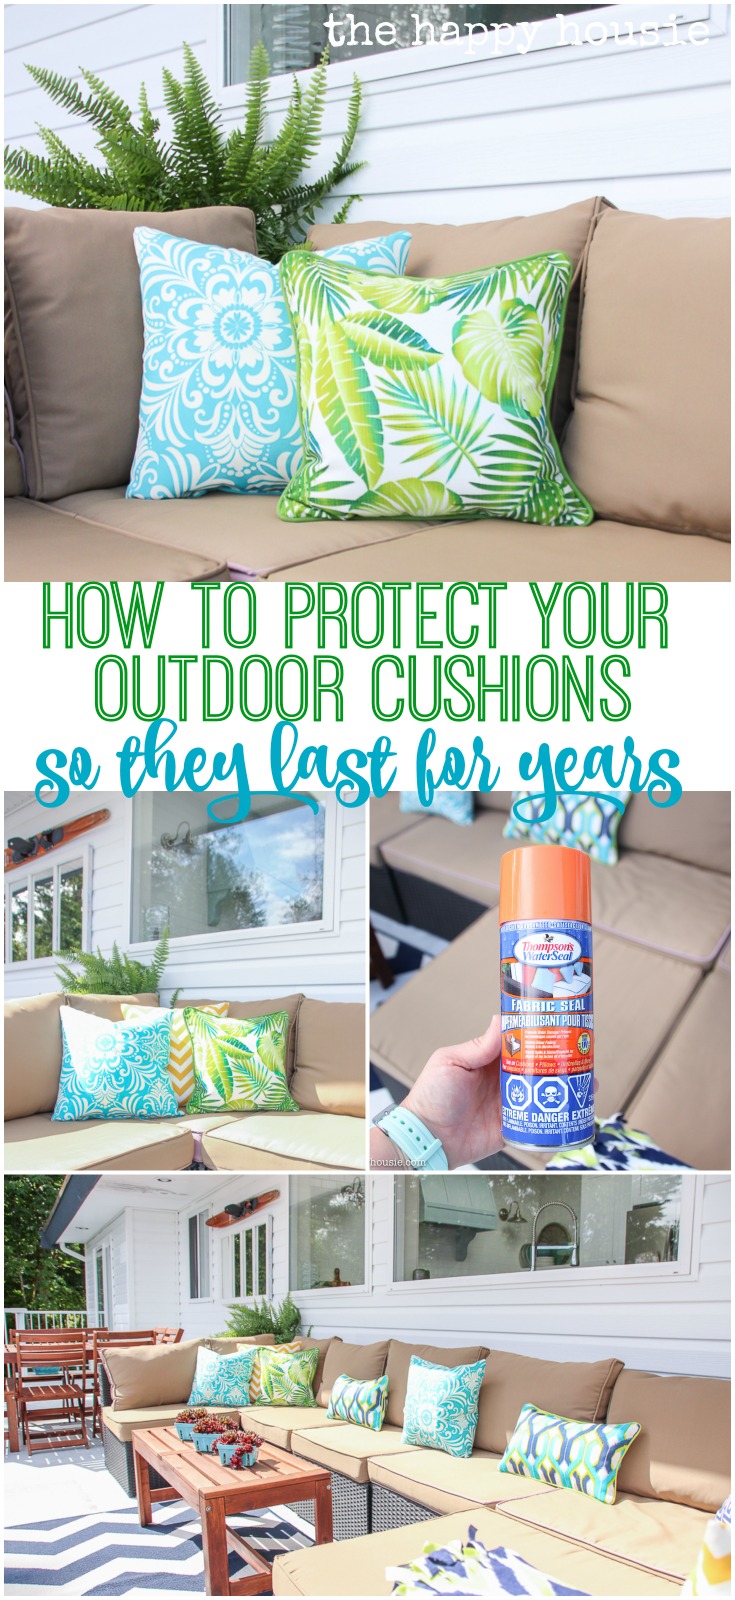 How to Protect Your Outdoor Cushions | The Happy Housie